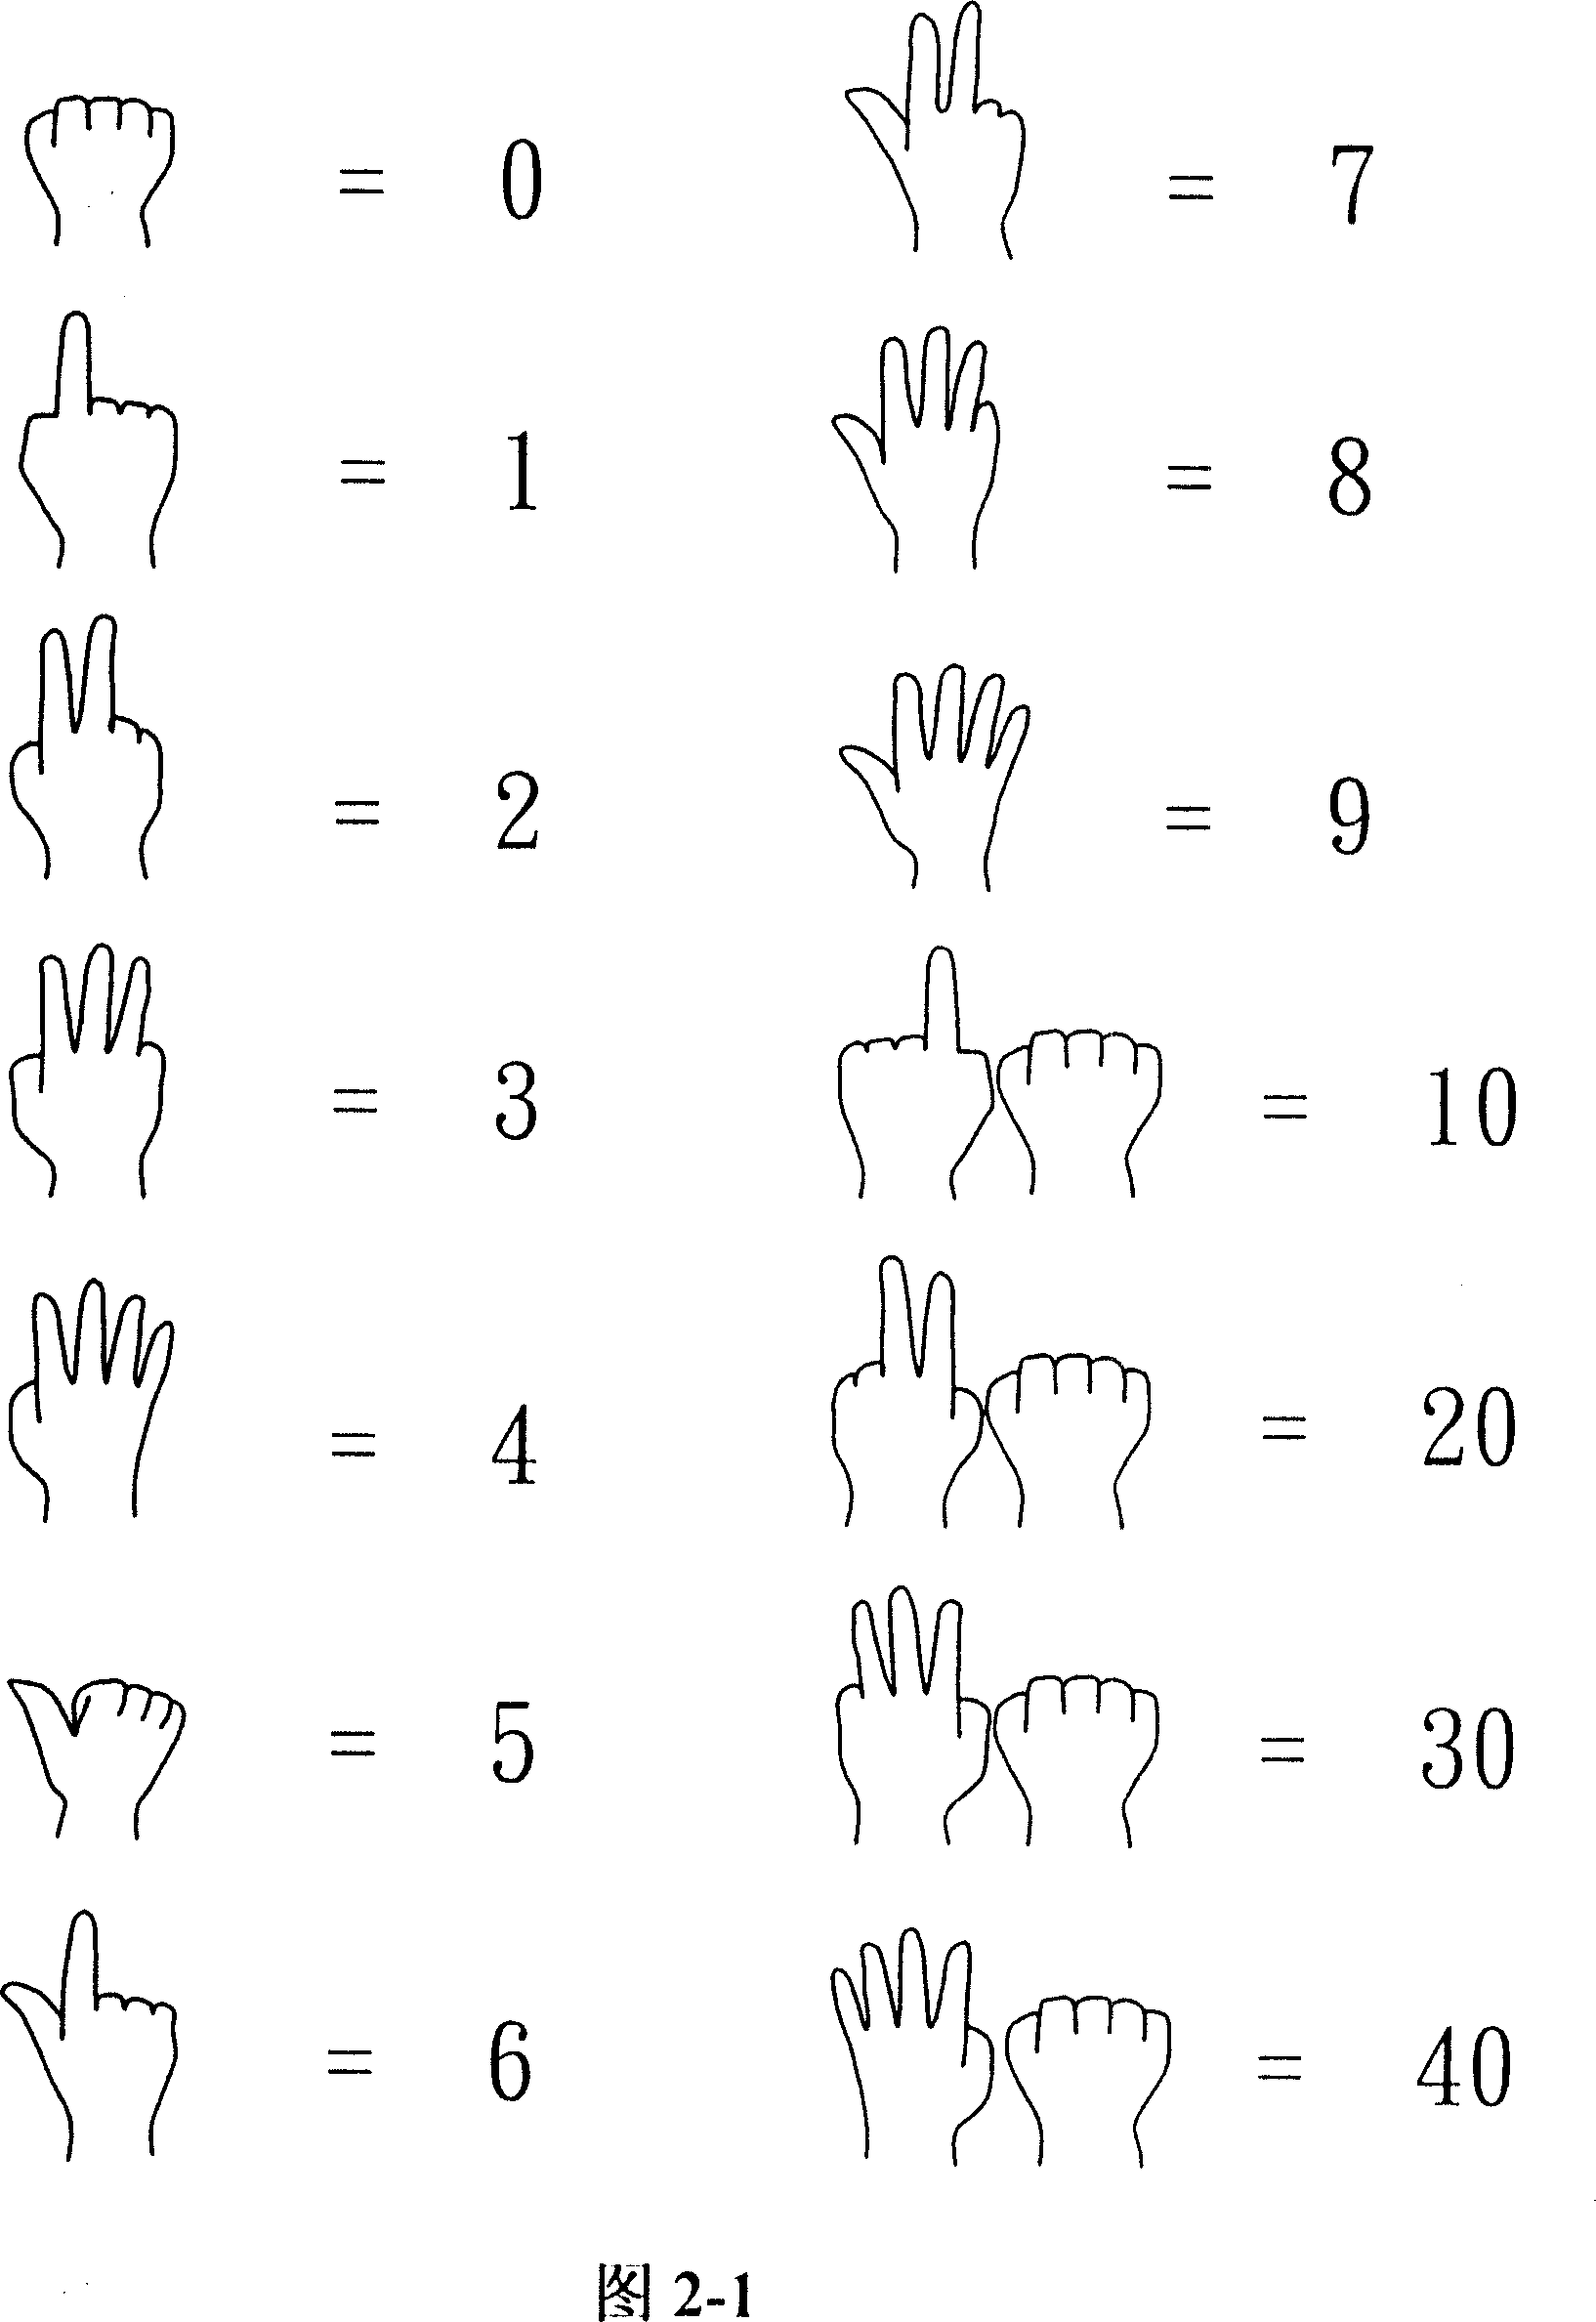 Mental arithmetic counting method using ten fingers capable of activating right brain